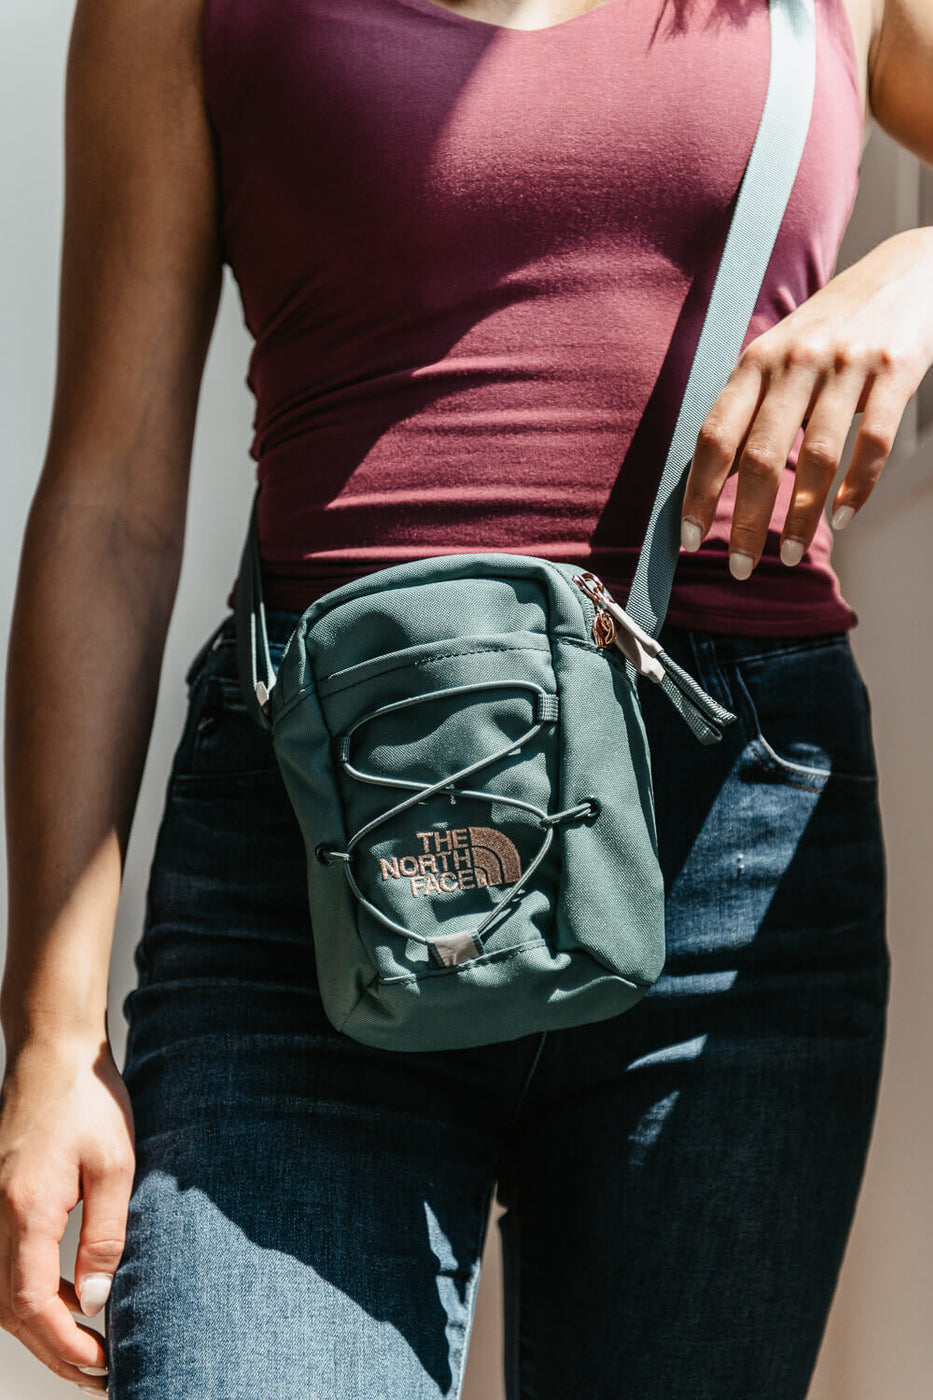 North Face Lumbar Belt Bag on Sale at Urban Outfitters 2019 | The Strategist